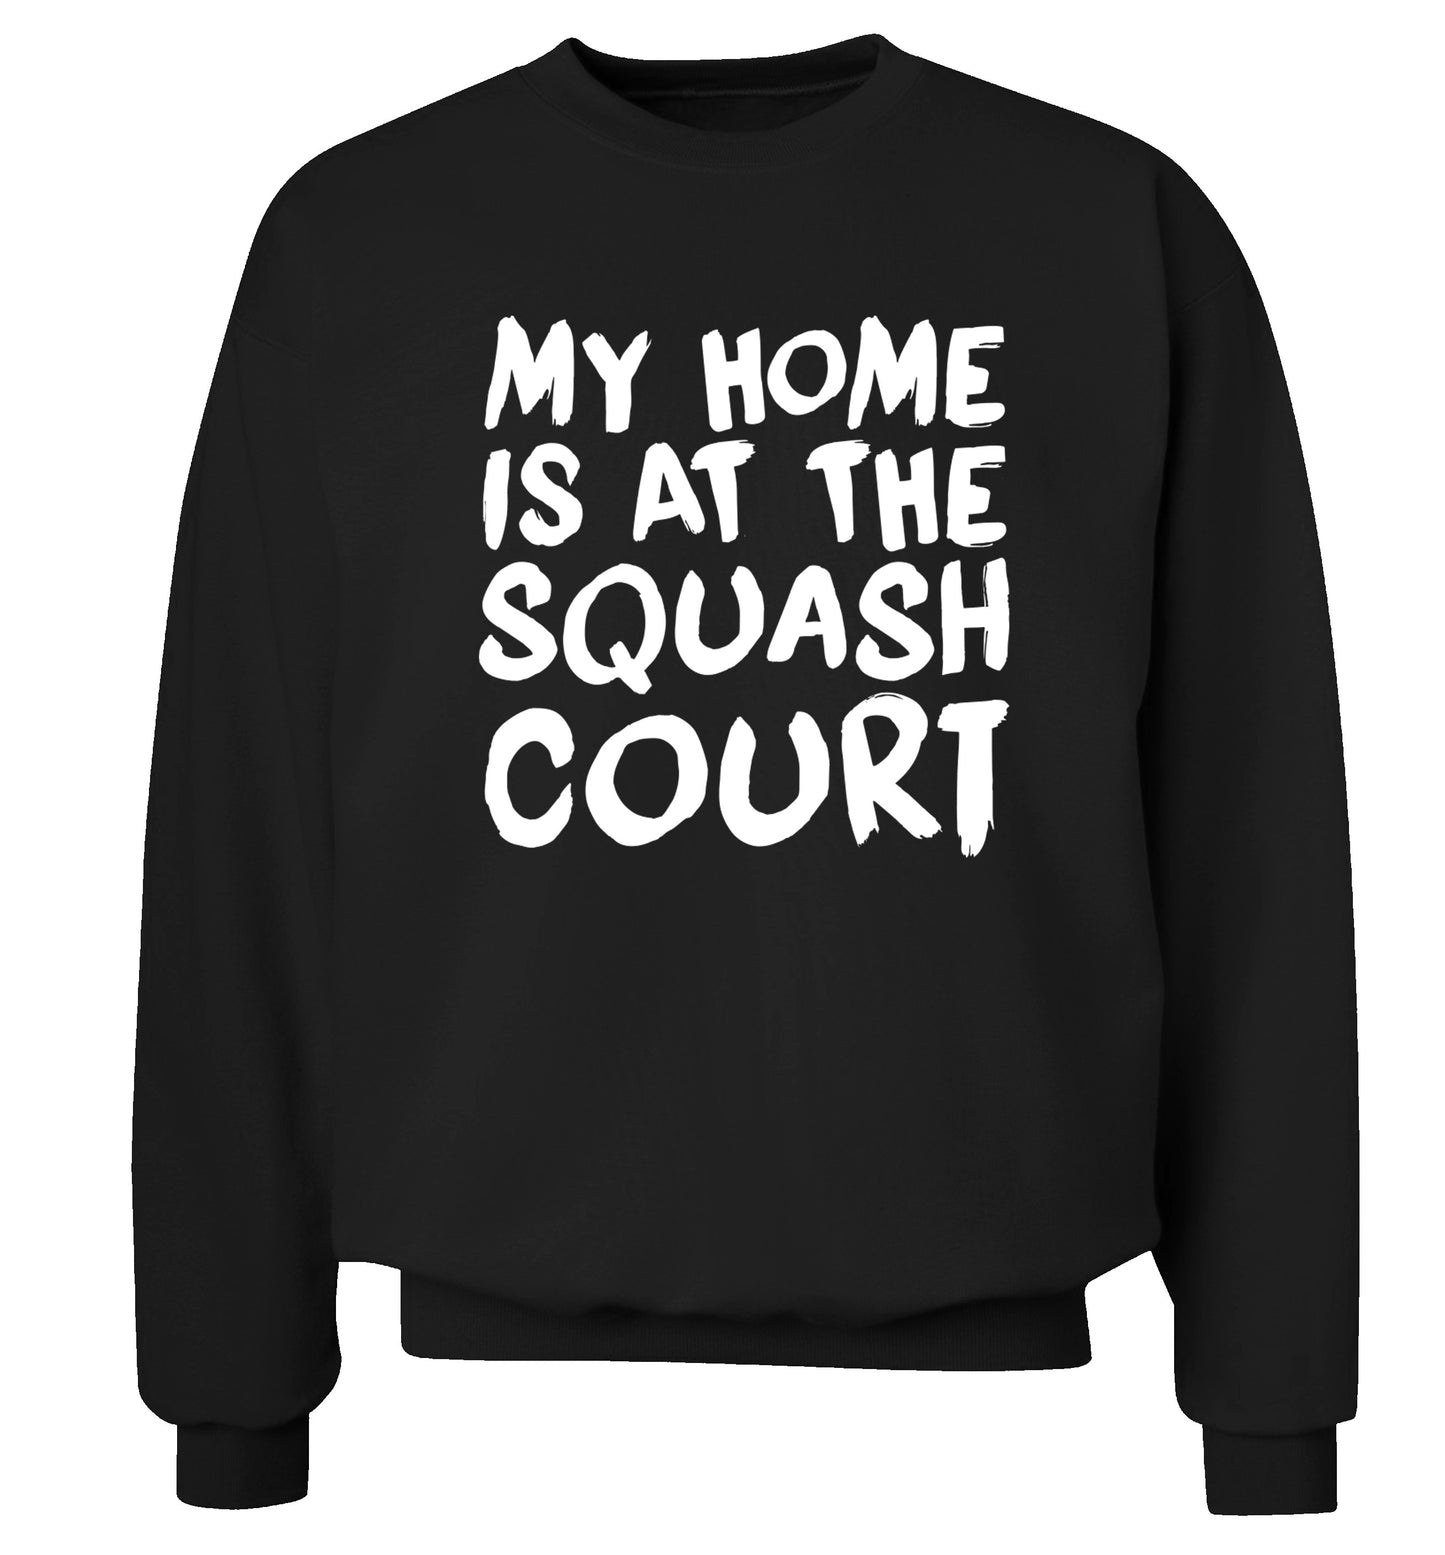 My home is at the squash court Adult's unisex black Sweater 2XL